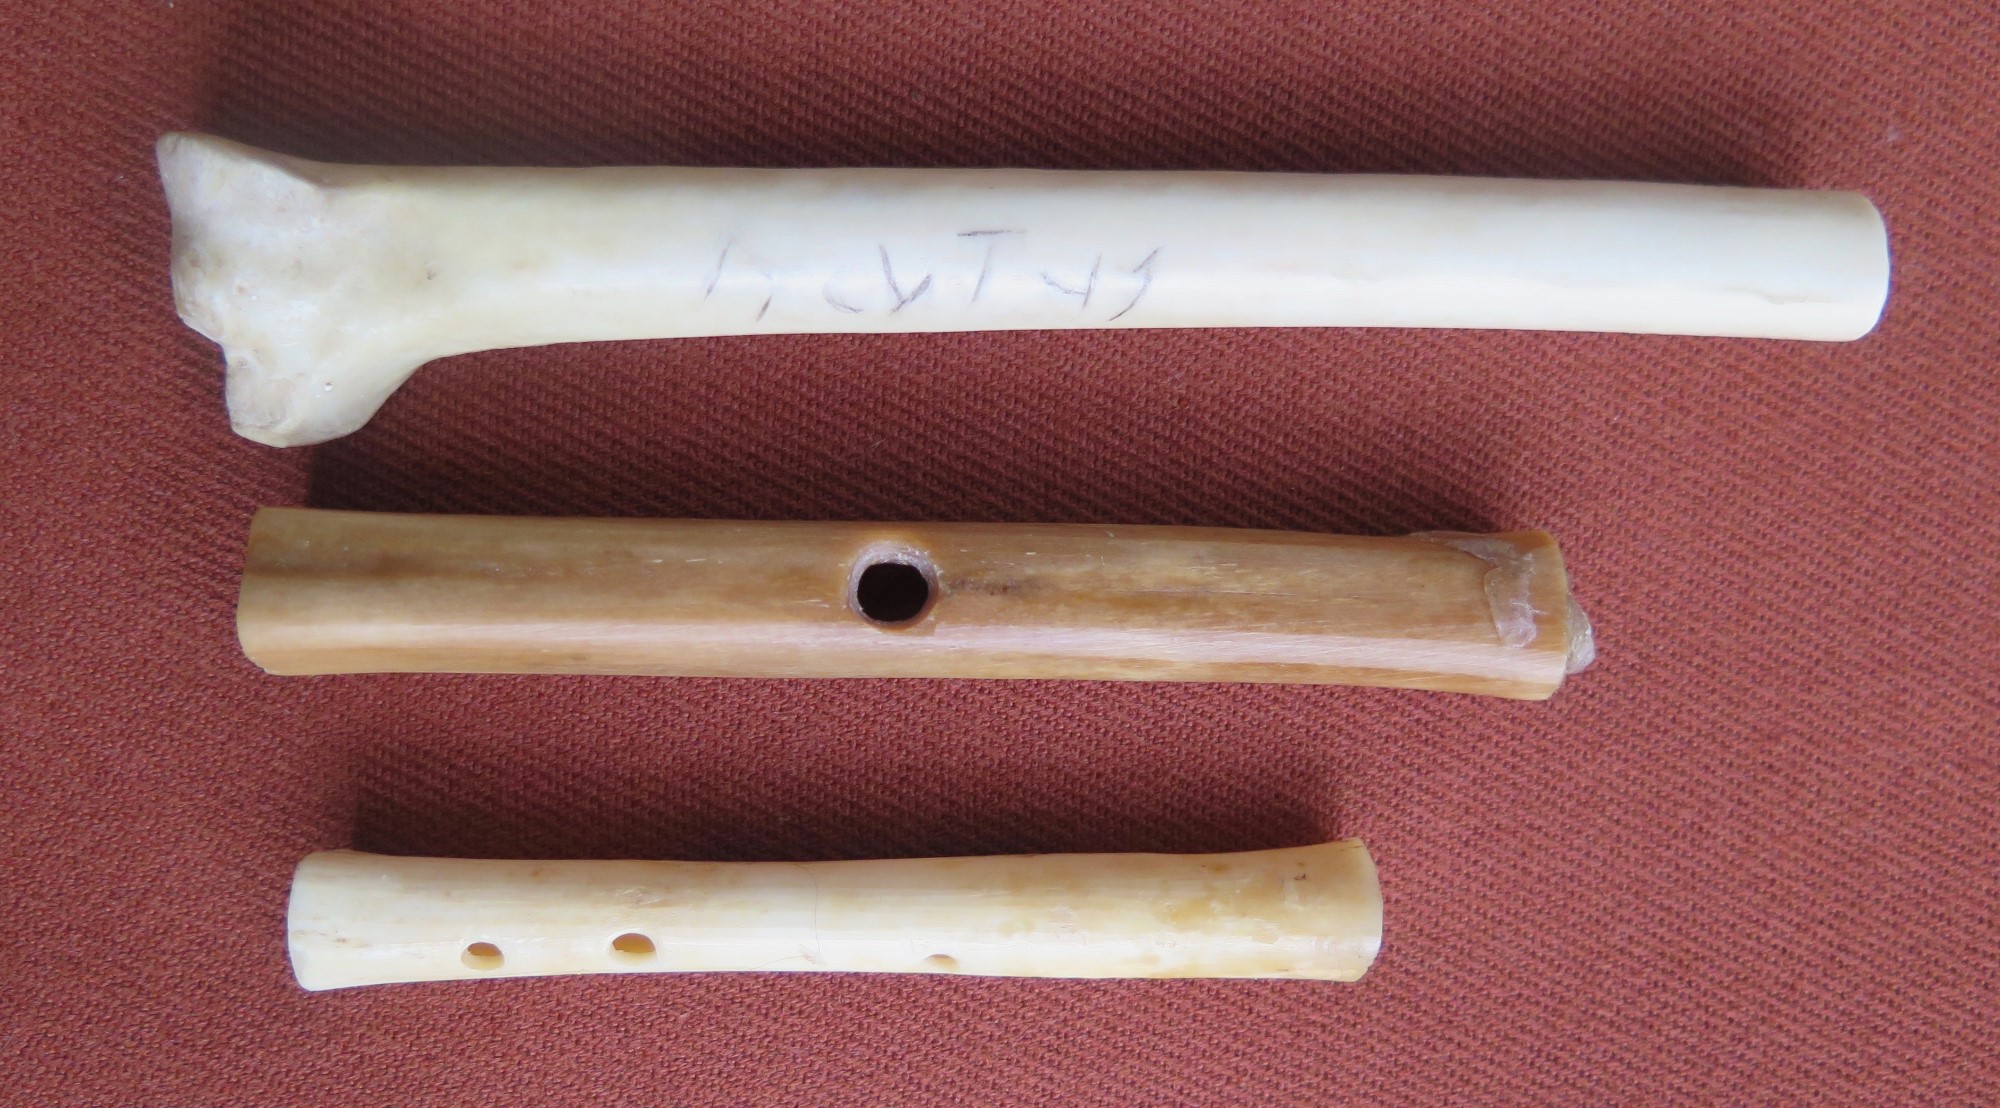 Acutus' Eagle Bone and Two Bone Tubes with Holes Found in A Roman Fleet  Base in The Netherlands - About Signalling Whistles and Animal Calls | EXARC